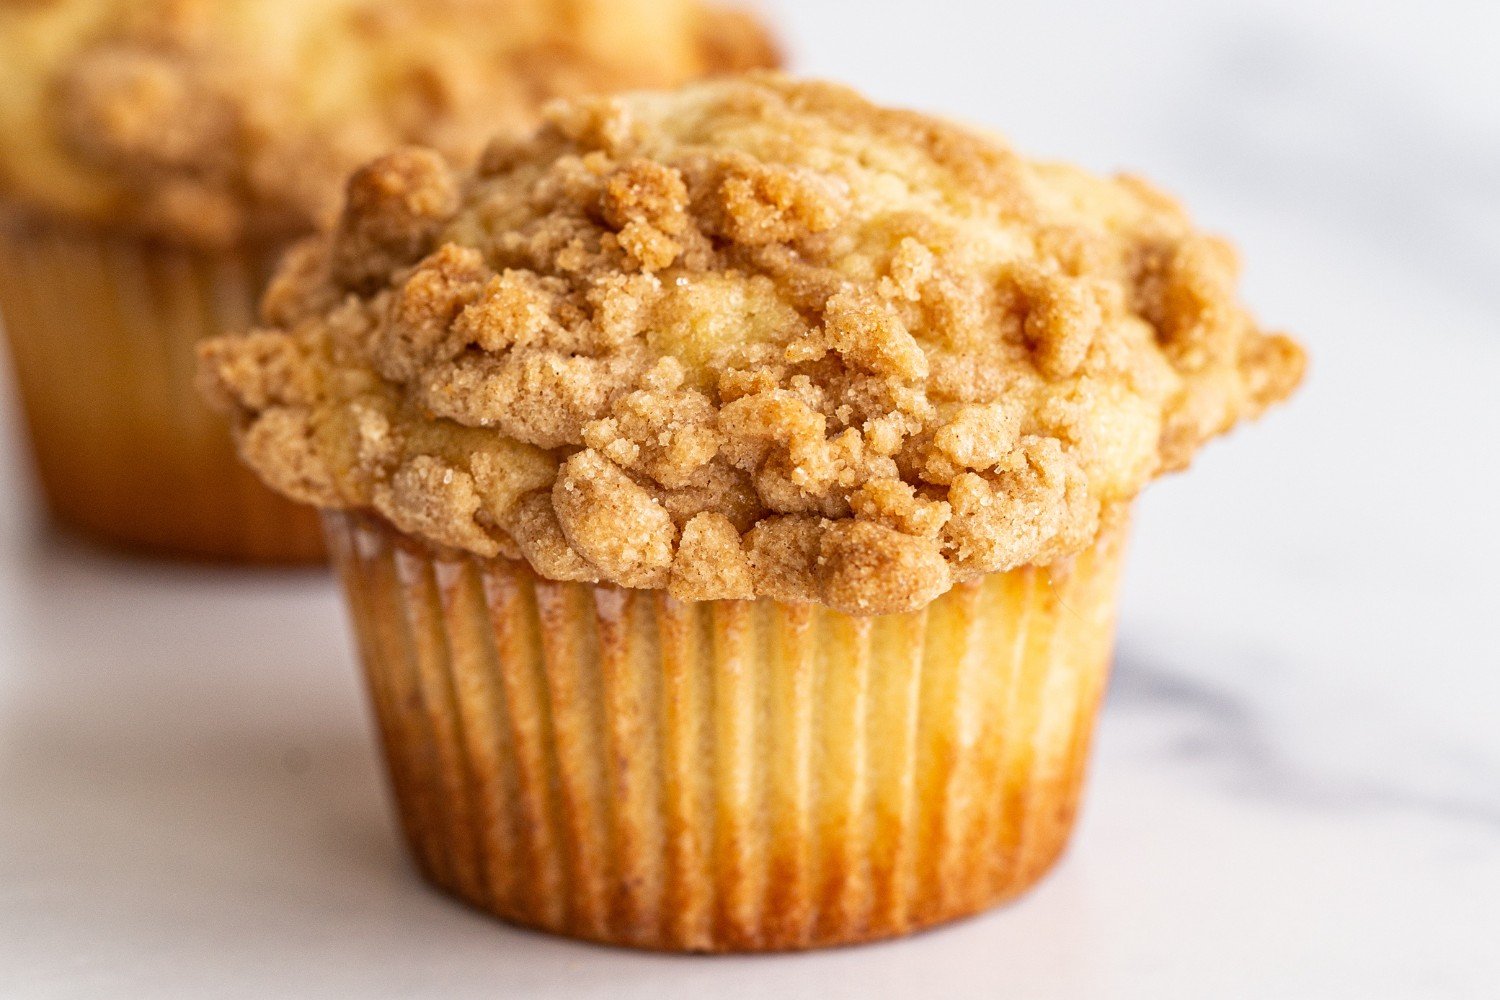 a muffin topped with cinnamon streusel.